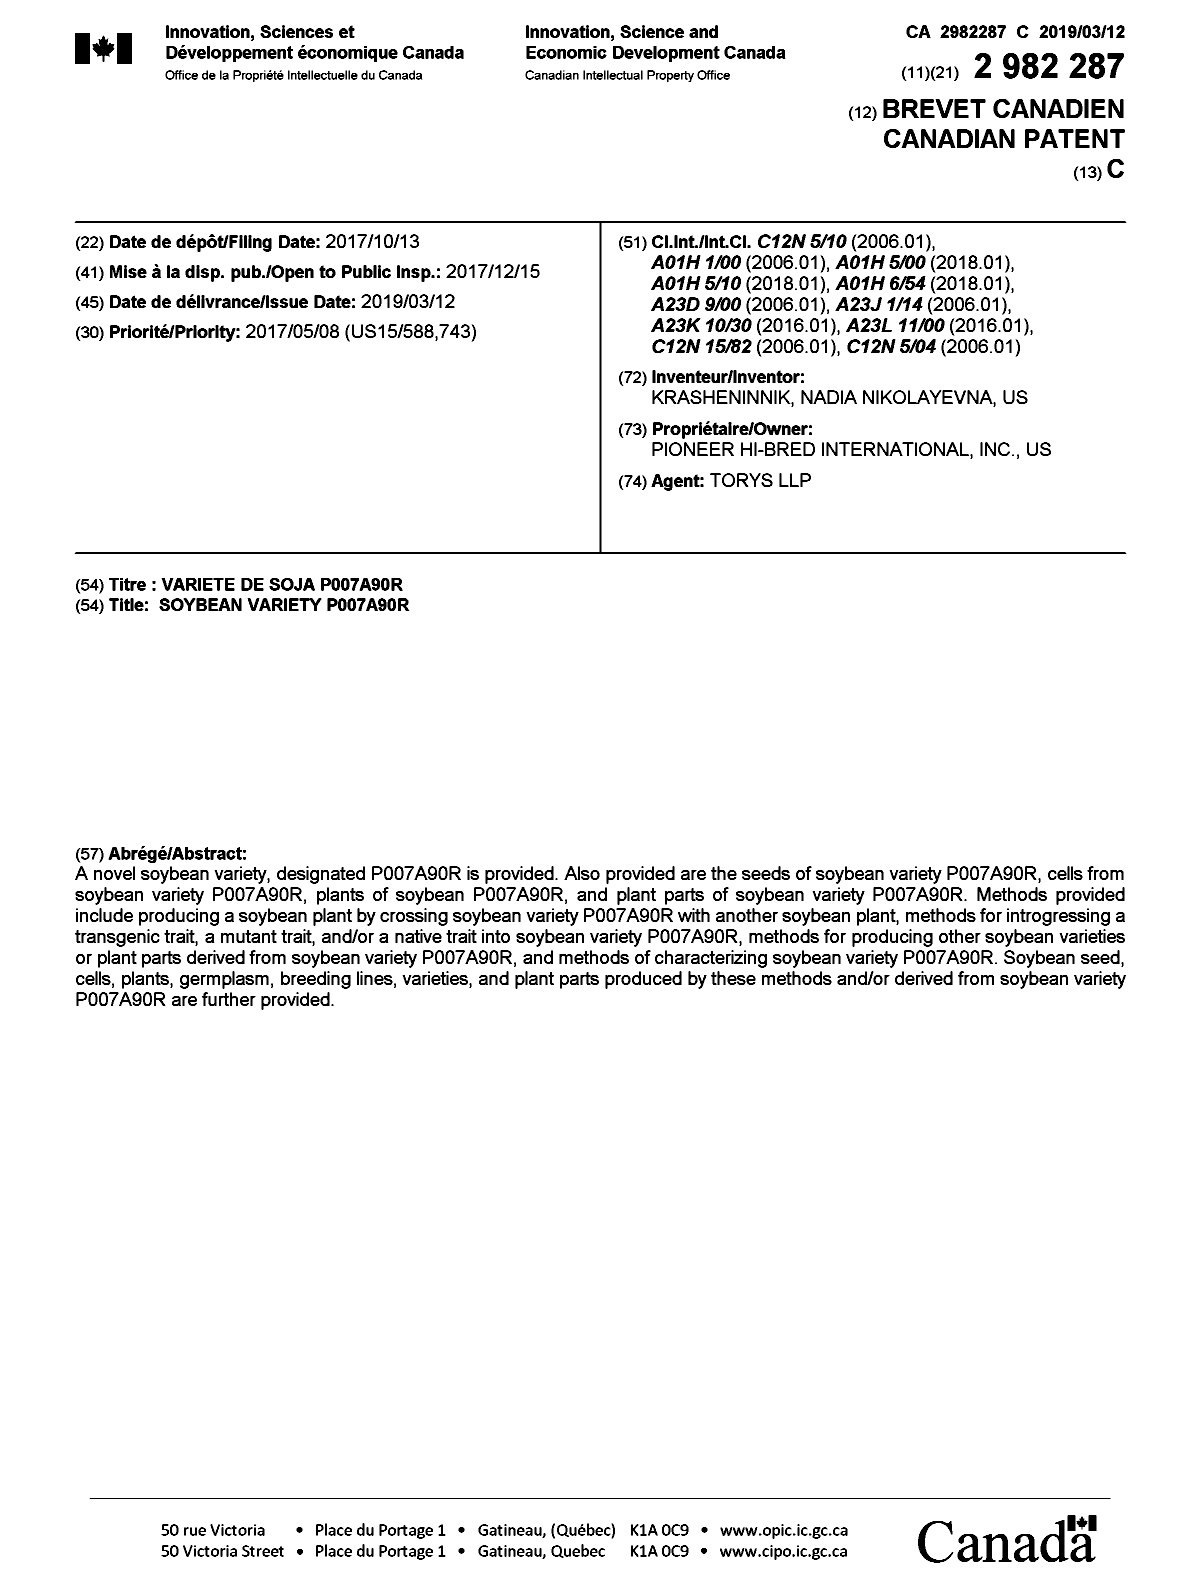 Canadian Patent Document 2982287. Cover Page 20190214. Image 1 of 1